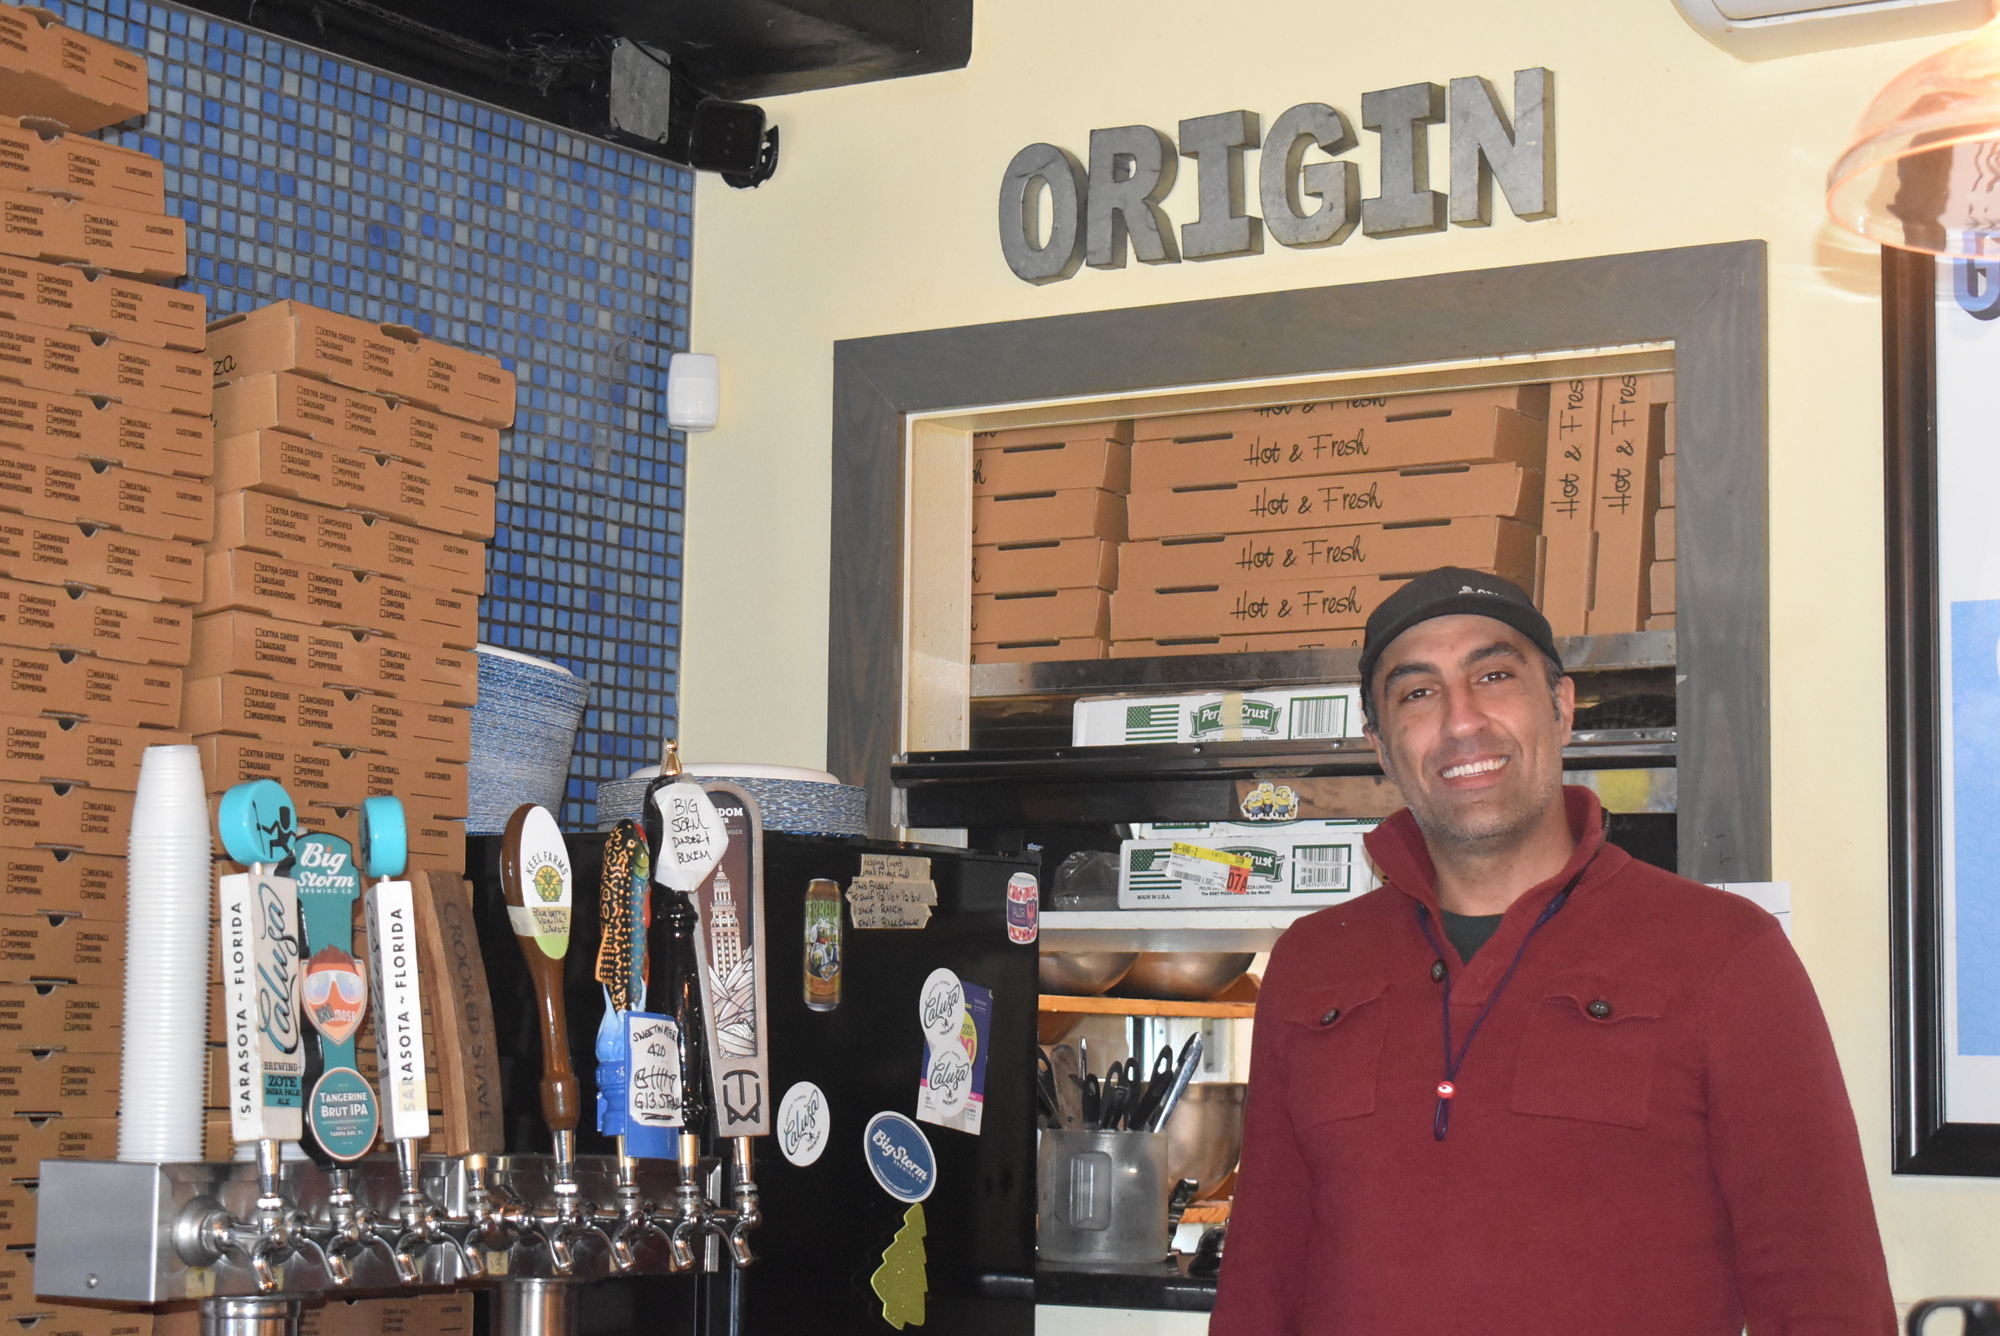 Rami Nehme is opening the third location of Origin Craft Beer & Pizza at UTC in late January or early February. His first location, pictured, opened in 2016 on Sarasota’s Hillview Street.